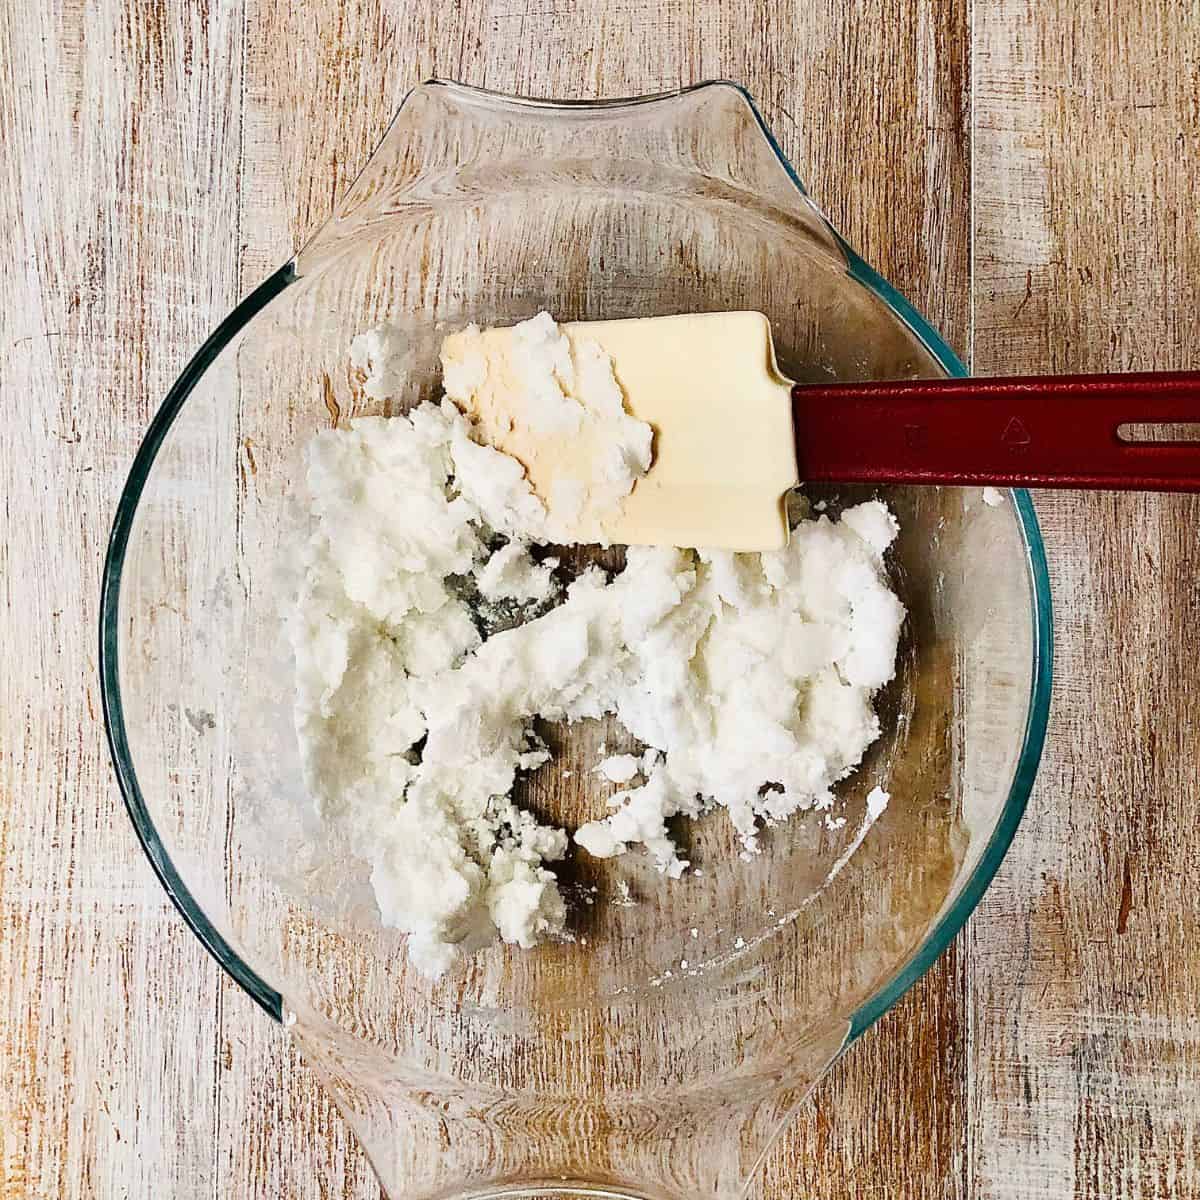 A glass bowl containing a mixture of icing sugar and coconut oil, with a spatula.